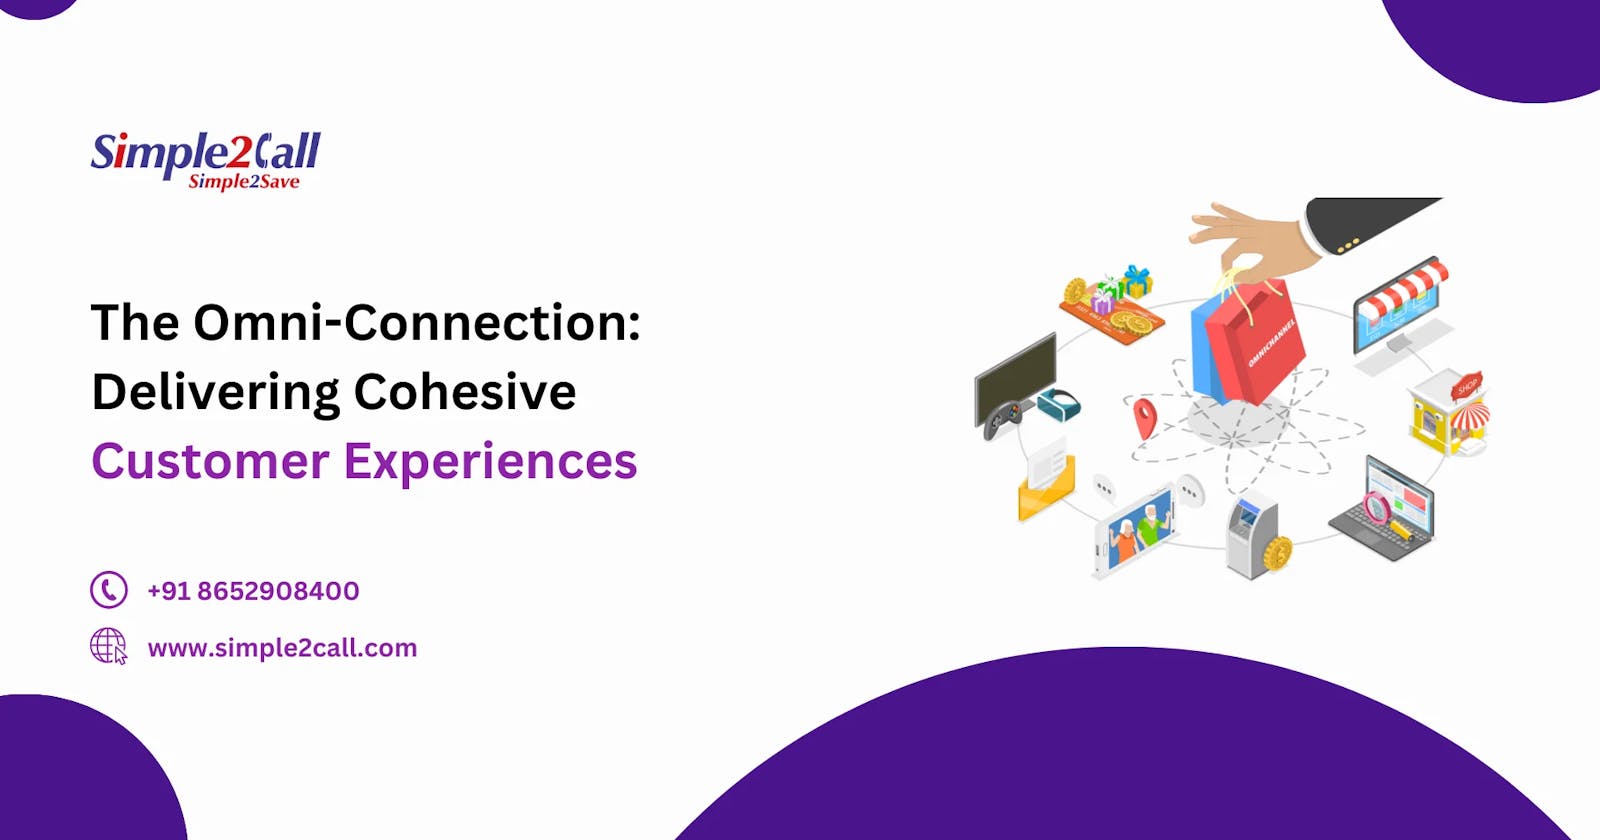 The Omni-Connection: Delivering Cohesive Customer Experiences